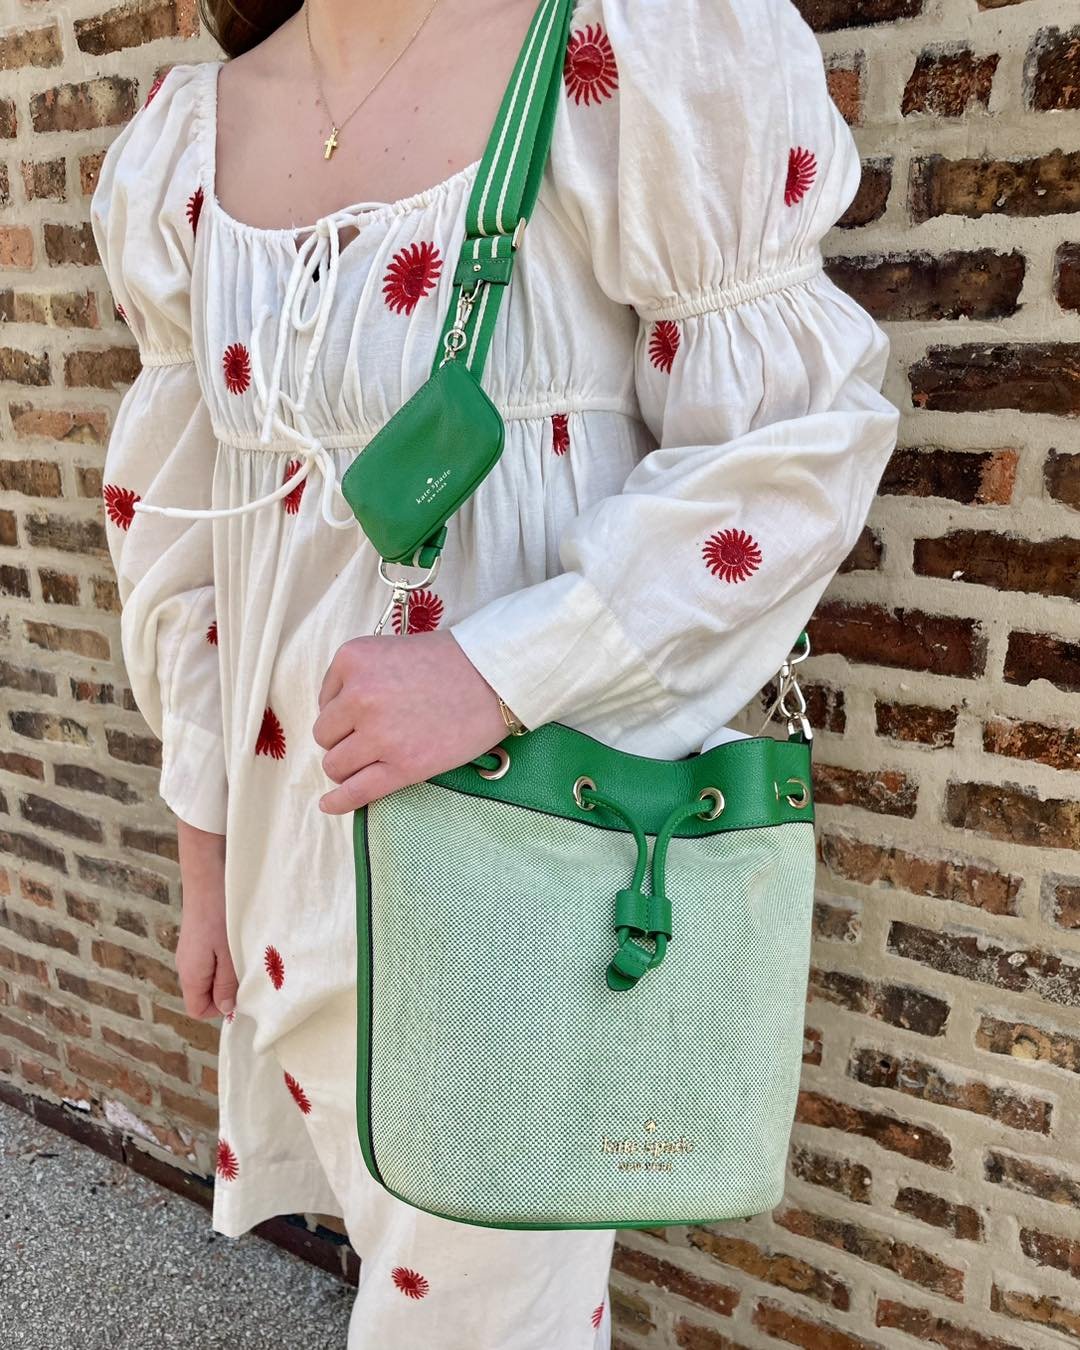 Obsessed with these Kate Spade bags!🤩

Colors and styles that are perfect for spring and summer! Come check out our designer bag selection today! Open from 10-6!🩷